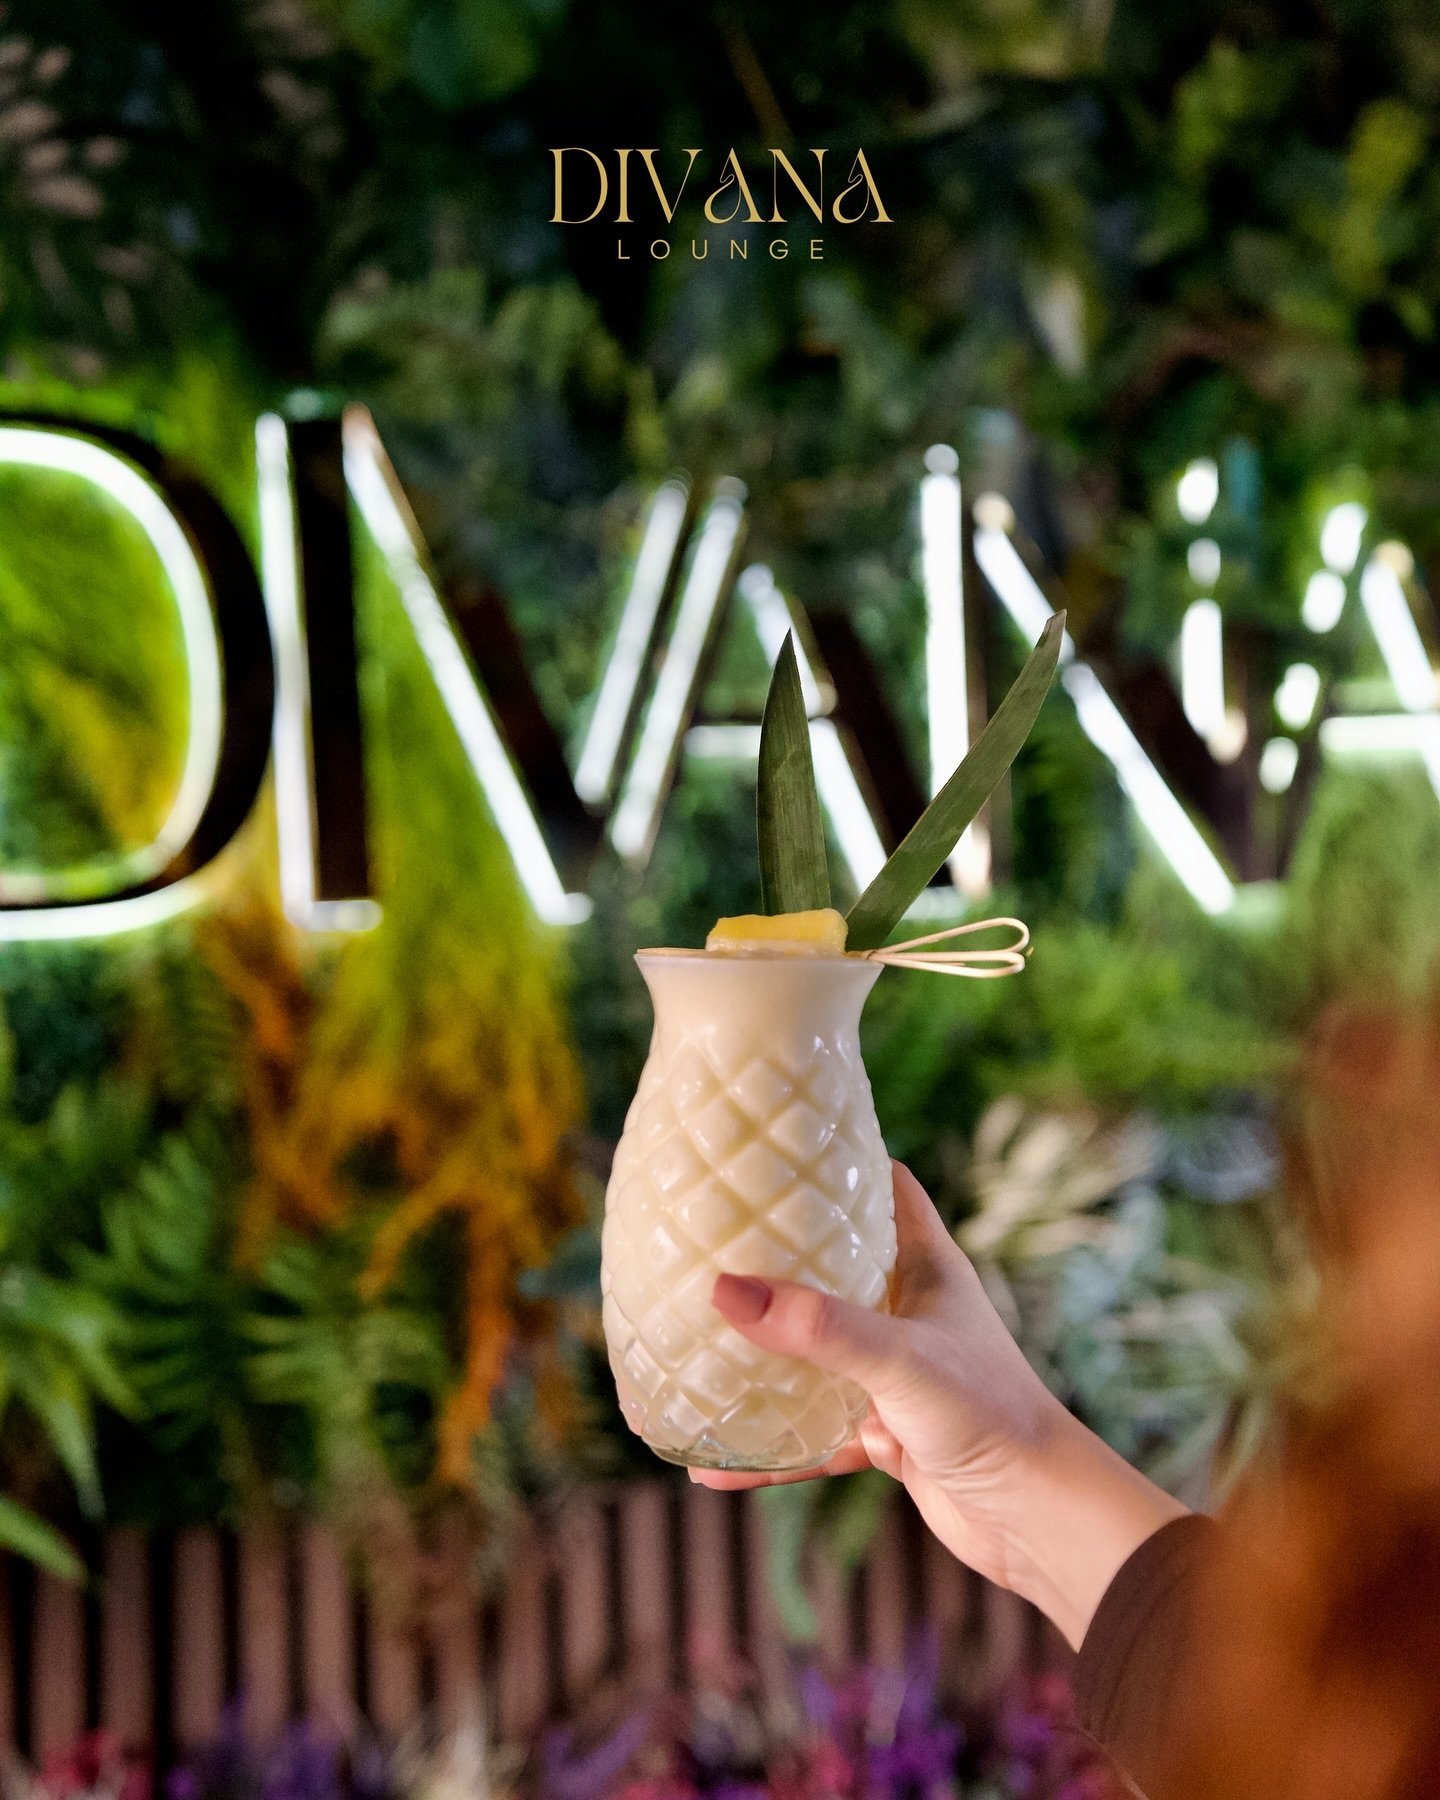 Raise a glass to the BEST new spot in town with our &ldquo;Pina Colardo&rdquo;! 🍍🤤

Walk-ins available | Call: 07355049930 

OUR WEBSITE IS LIVE: WWW.DIVANALOUNGE.CO.UK 💻

Opening Times ⏰:

SUN - THURS: 5PMPM - 12:00AM
FRI - SAT: 5PM5 - 1:00AM

Re